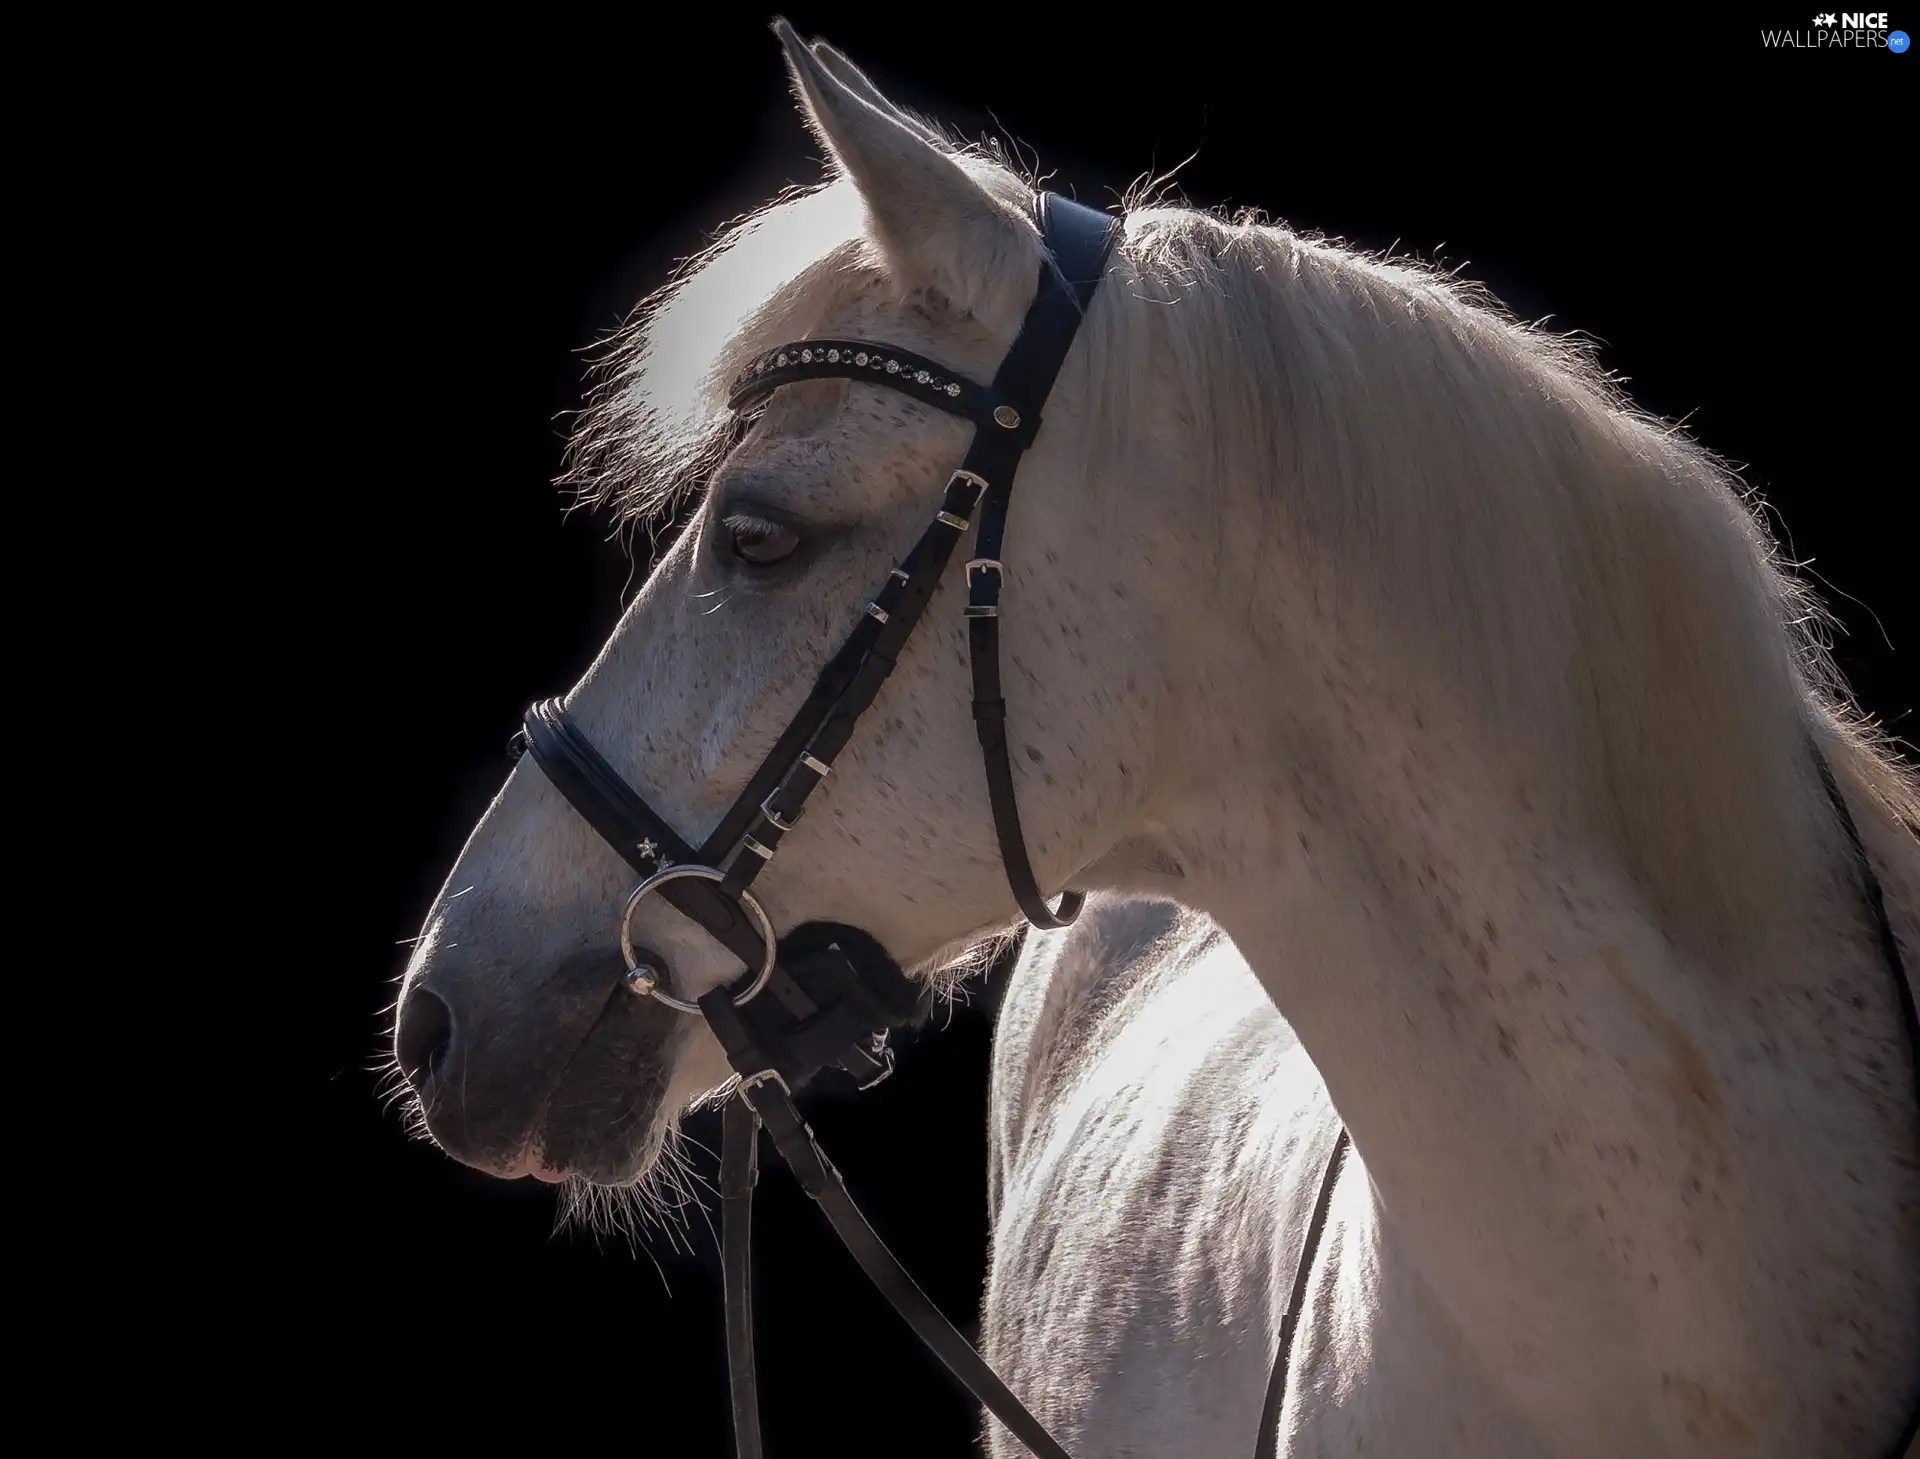 White, mouth, gear, Horse